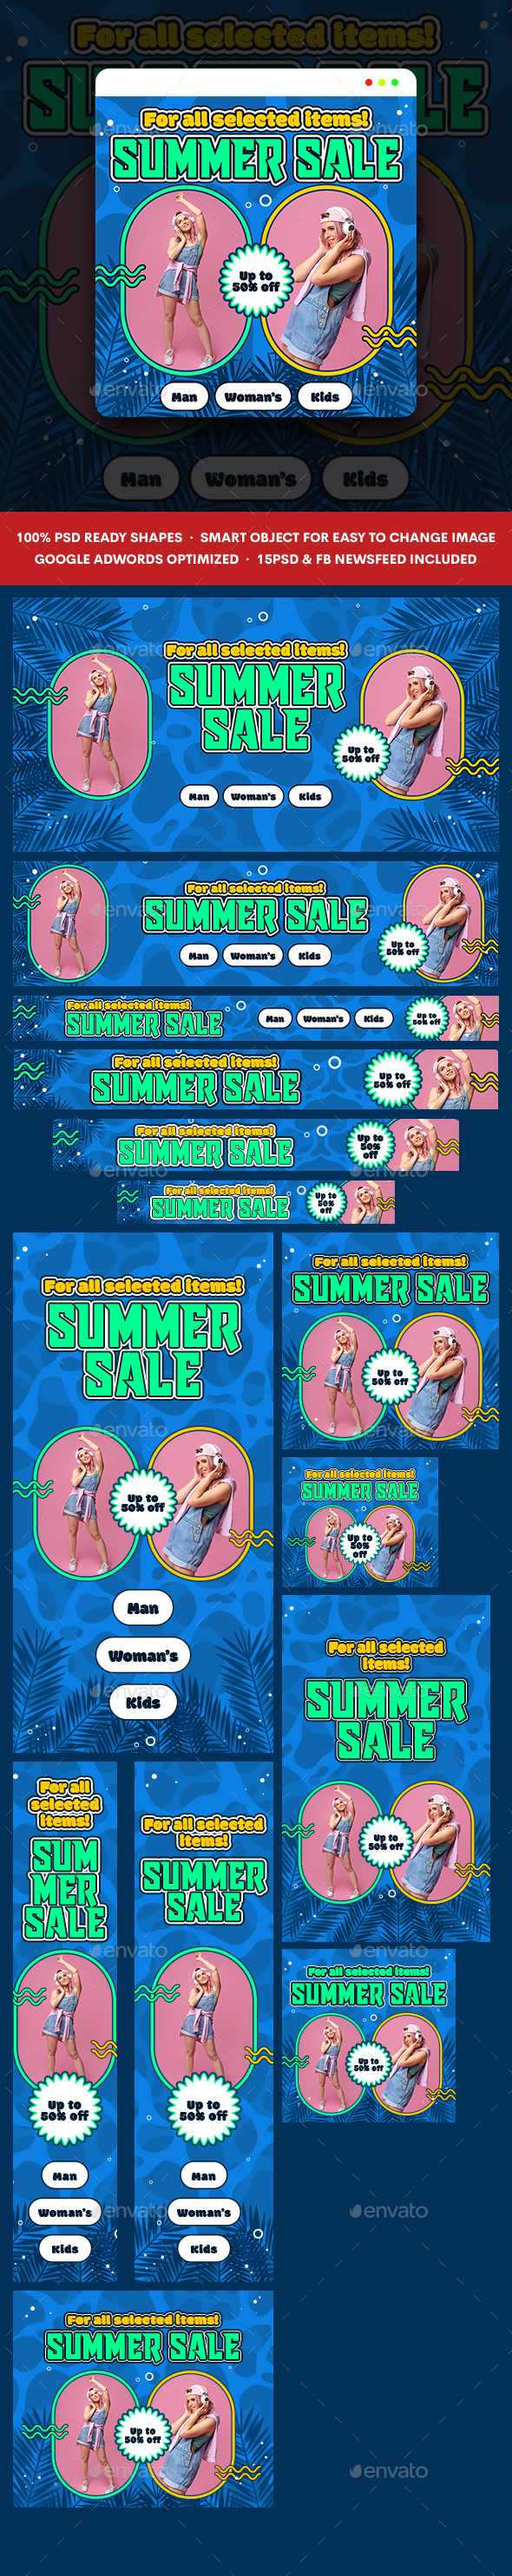 Summer Sale Banners Ad